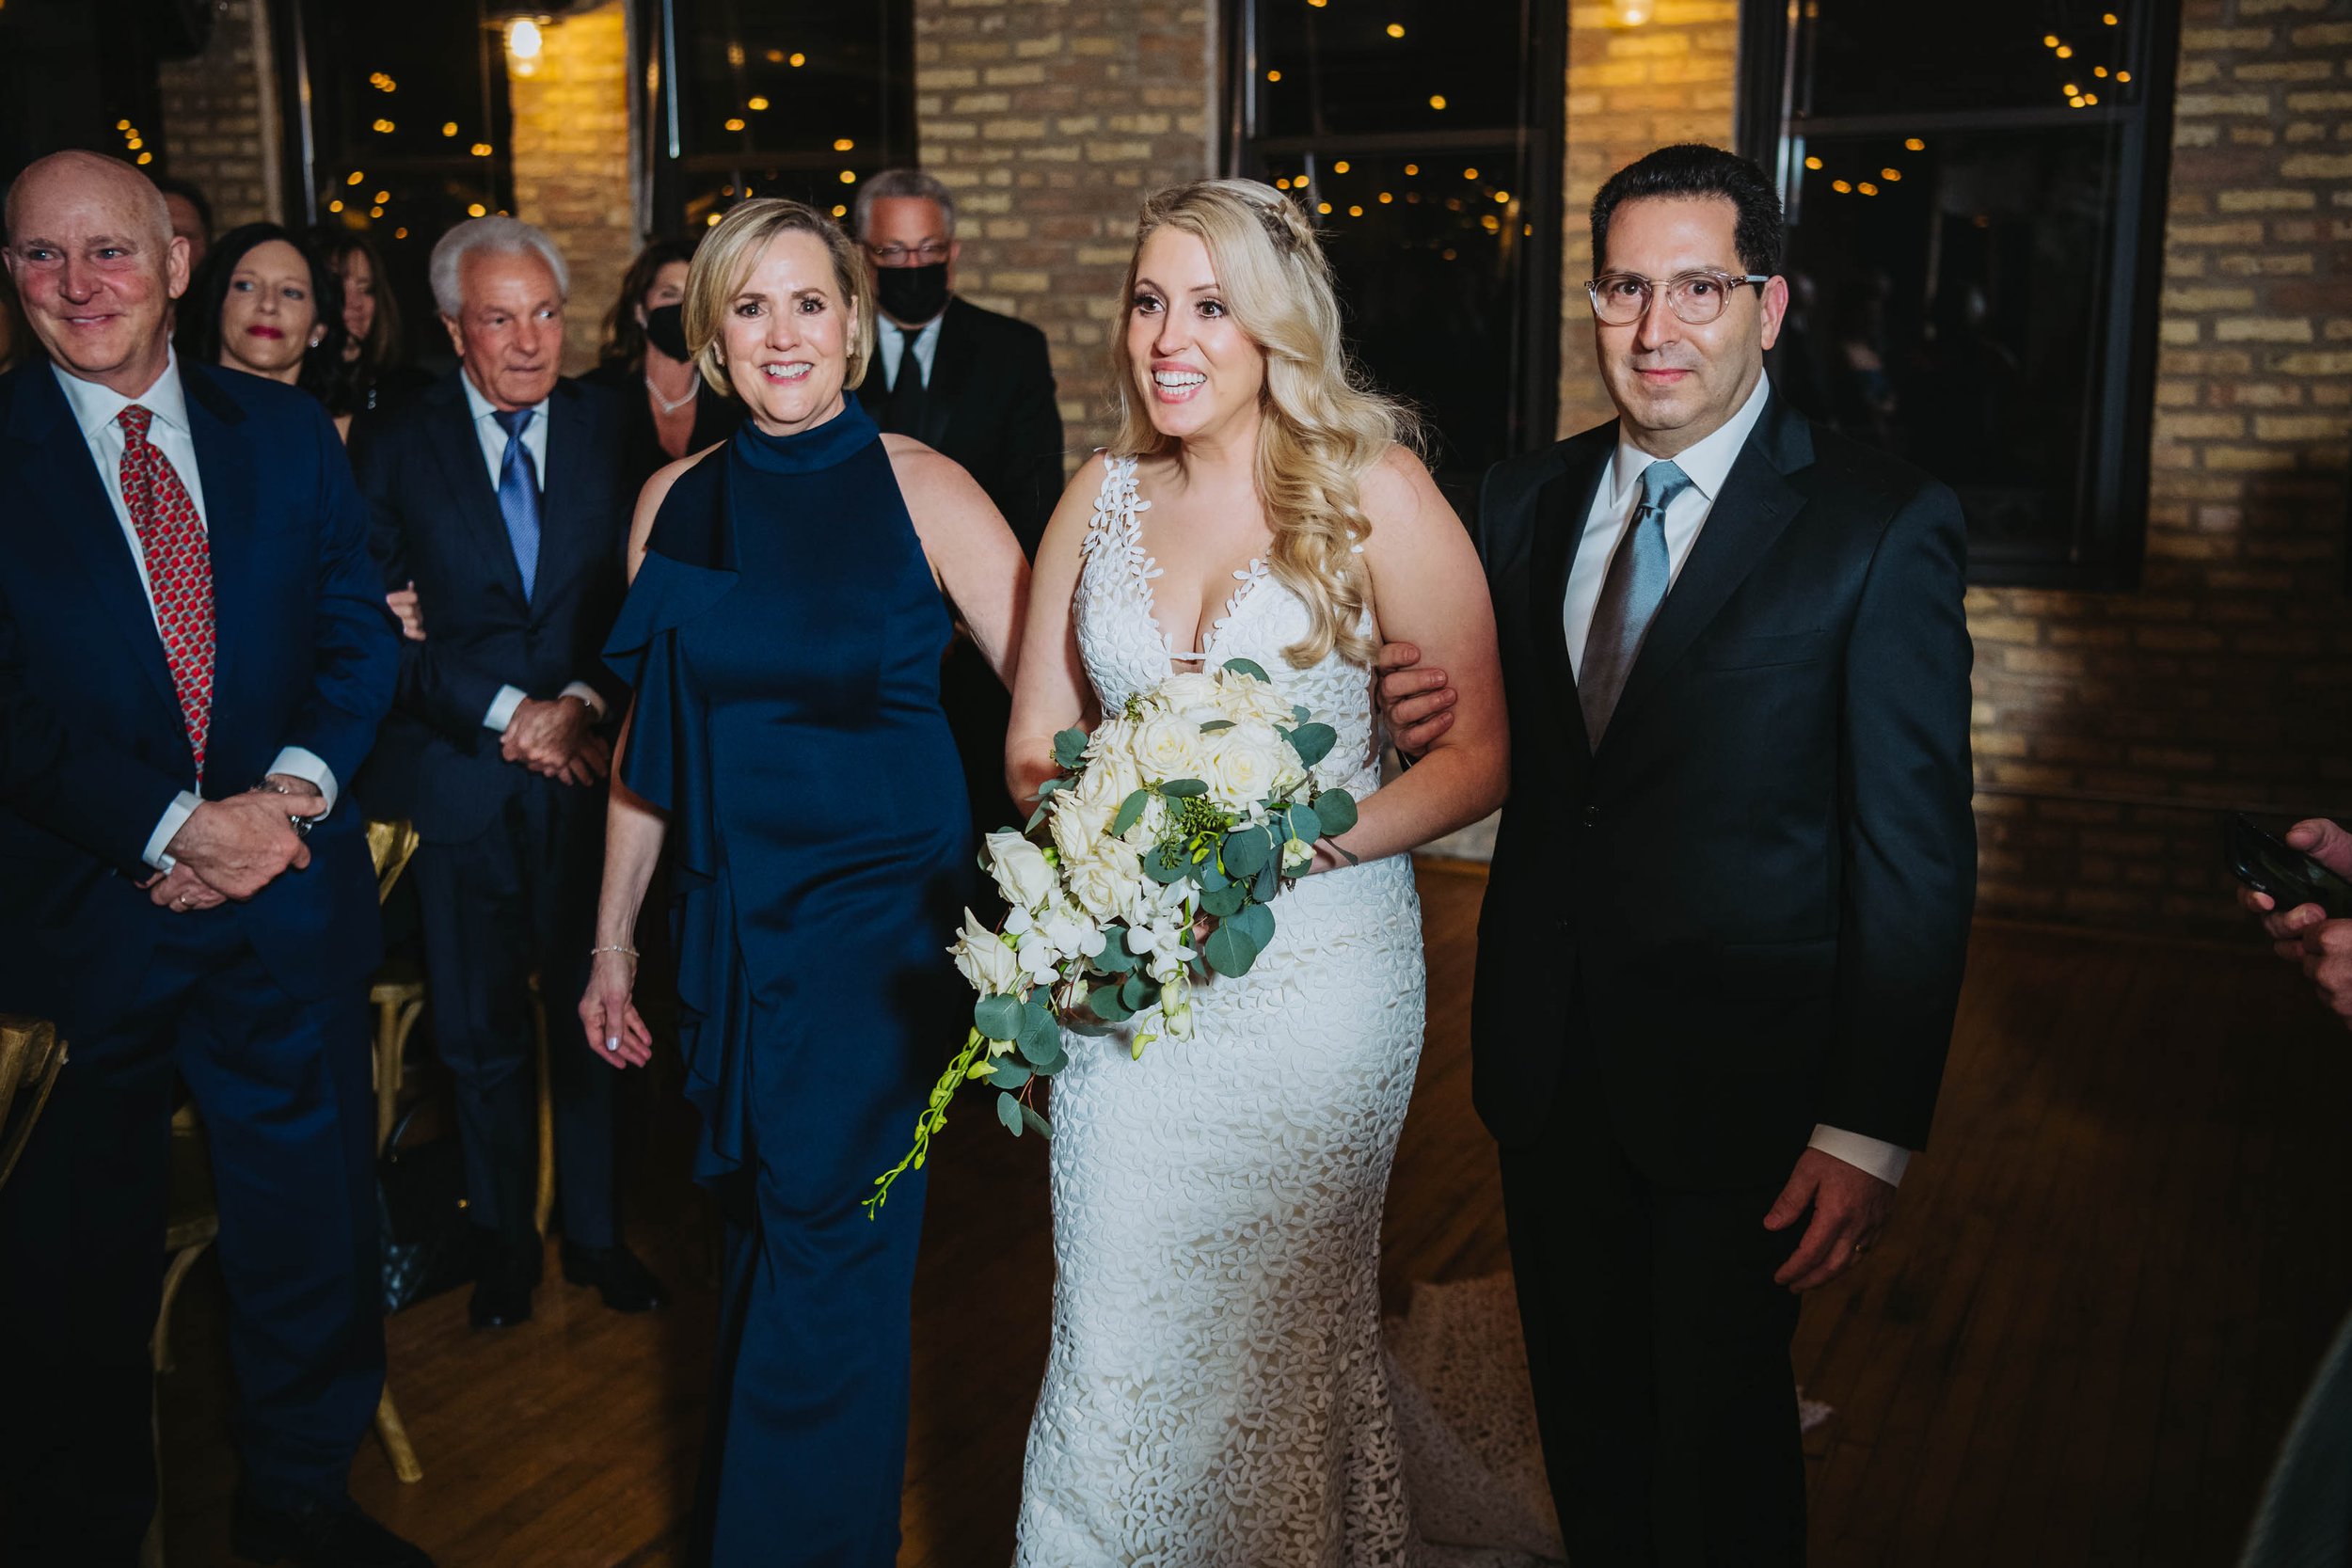 Chicago Wedding Photographer | Ravenswood Event Center | J. Brown Photography | bride and parents walk down aisle